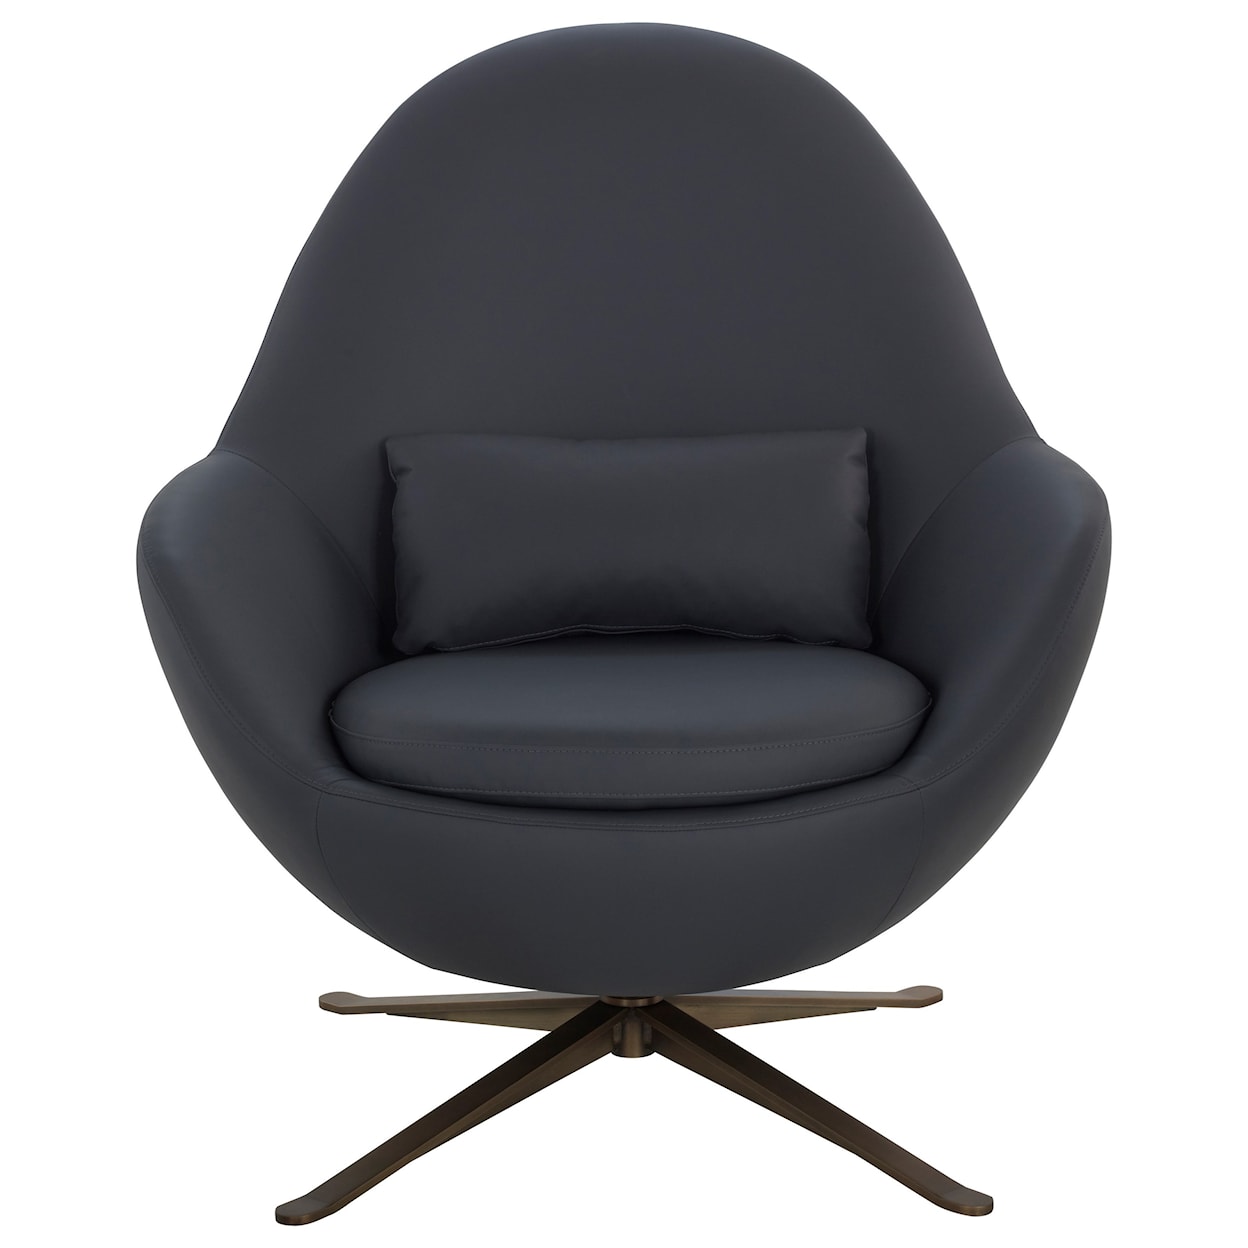 American Leather Jude Swivel Chair